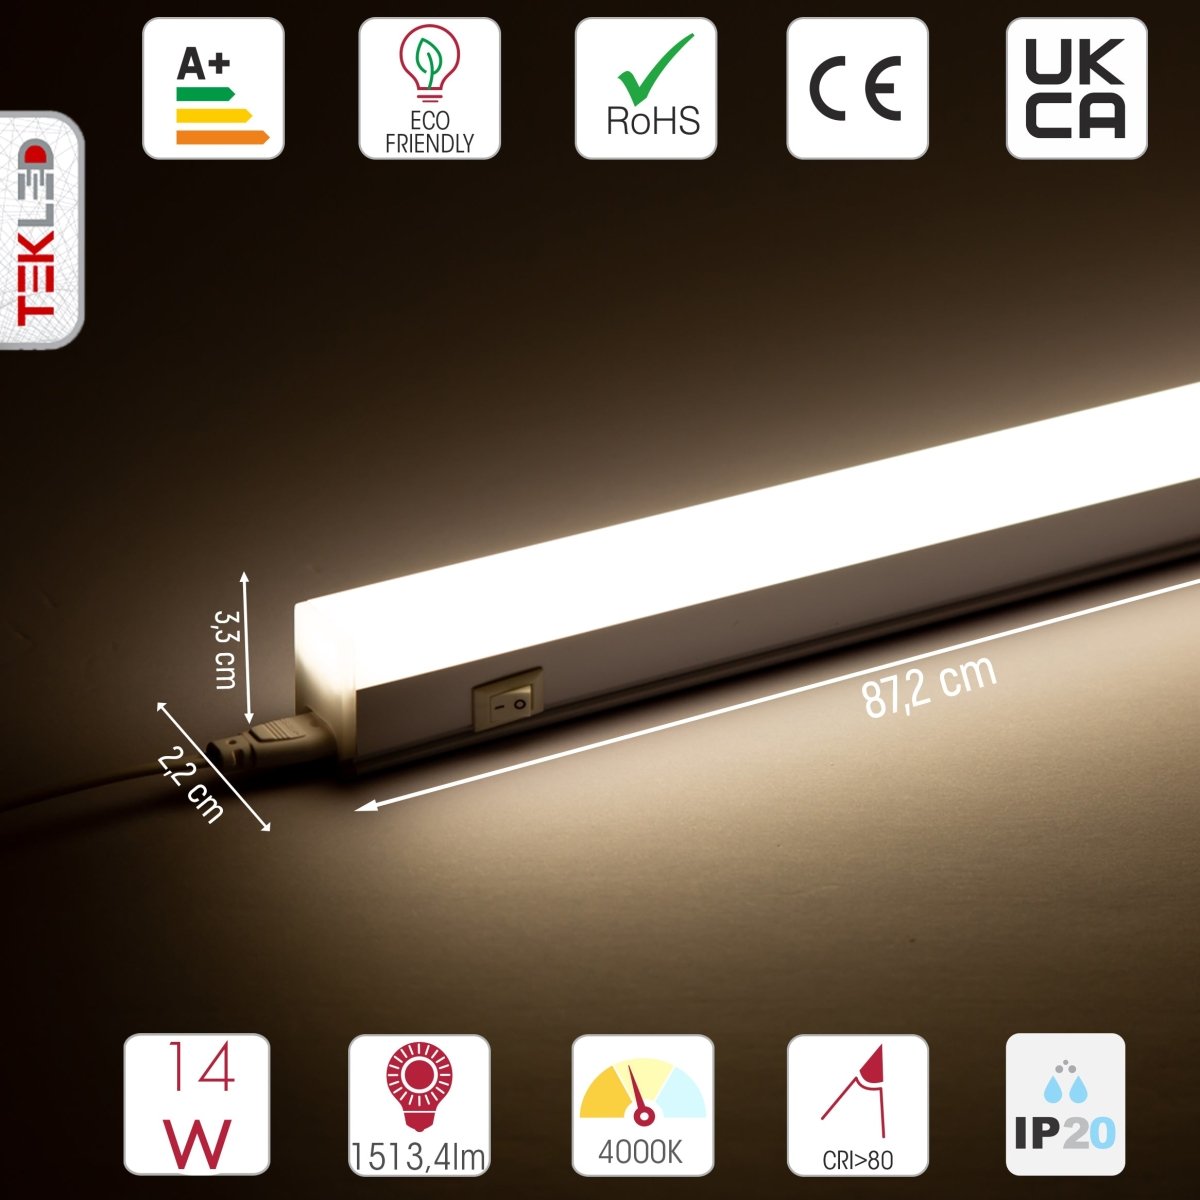 Technical specs and measurements for LED T5 Under Cabinet Link Light 14W 4000K Cool White IP20 with switch 872mm 3ft